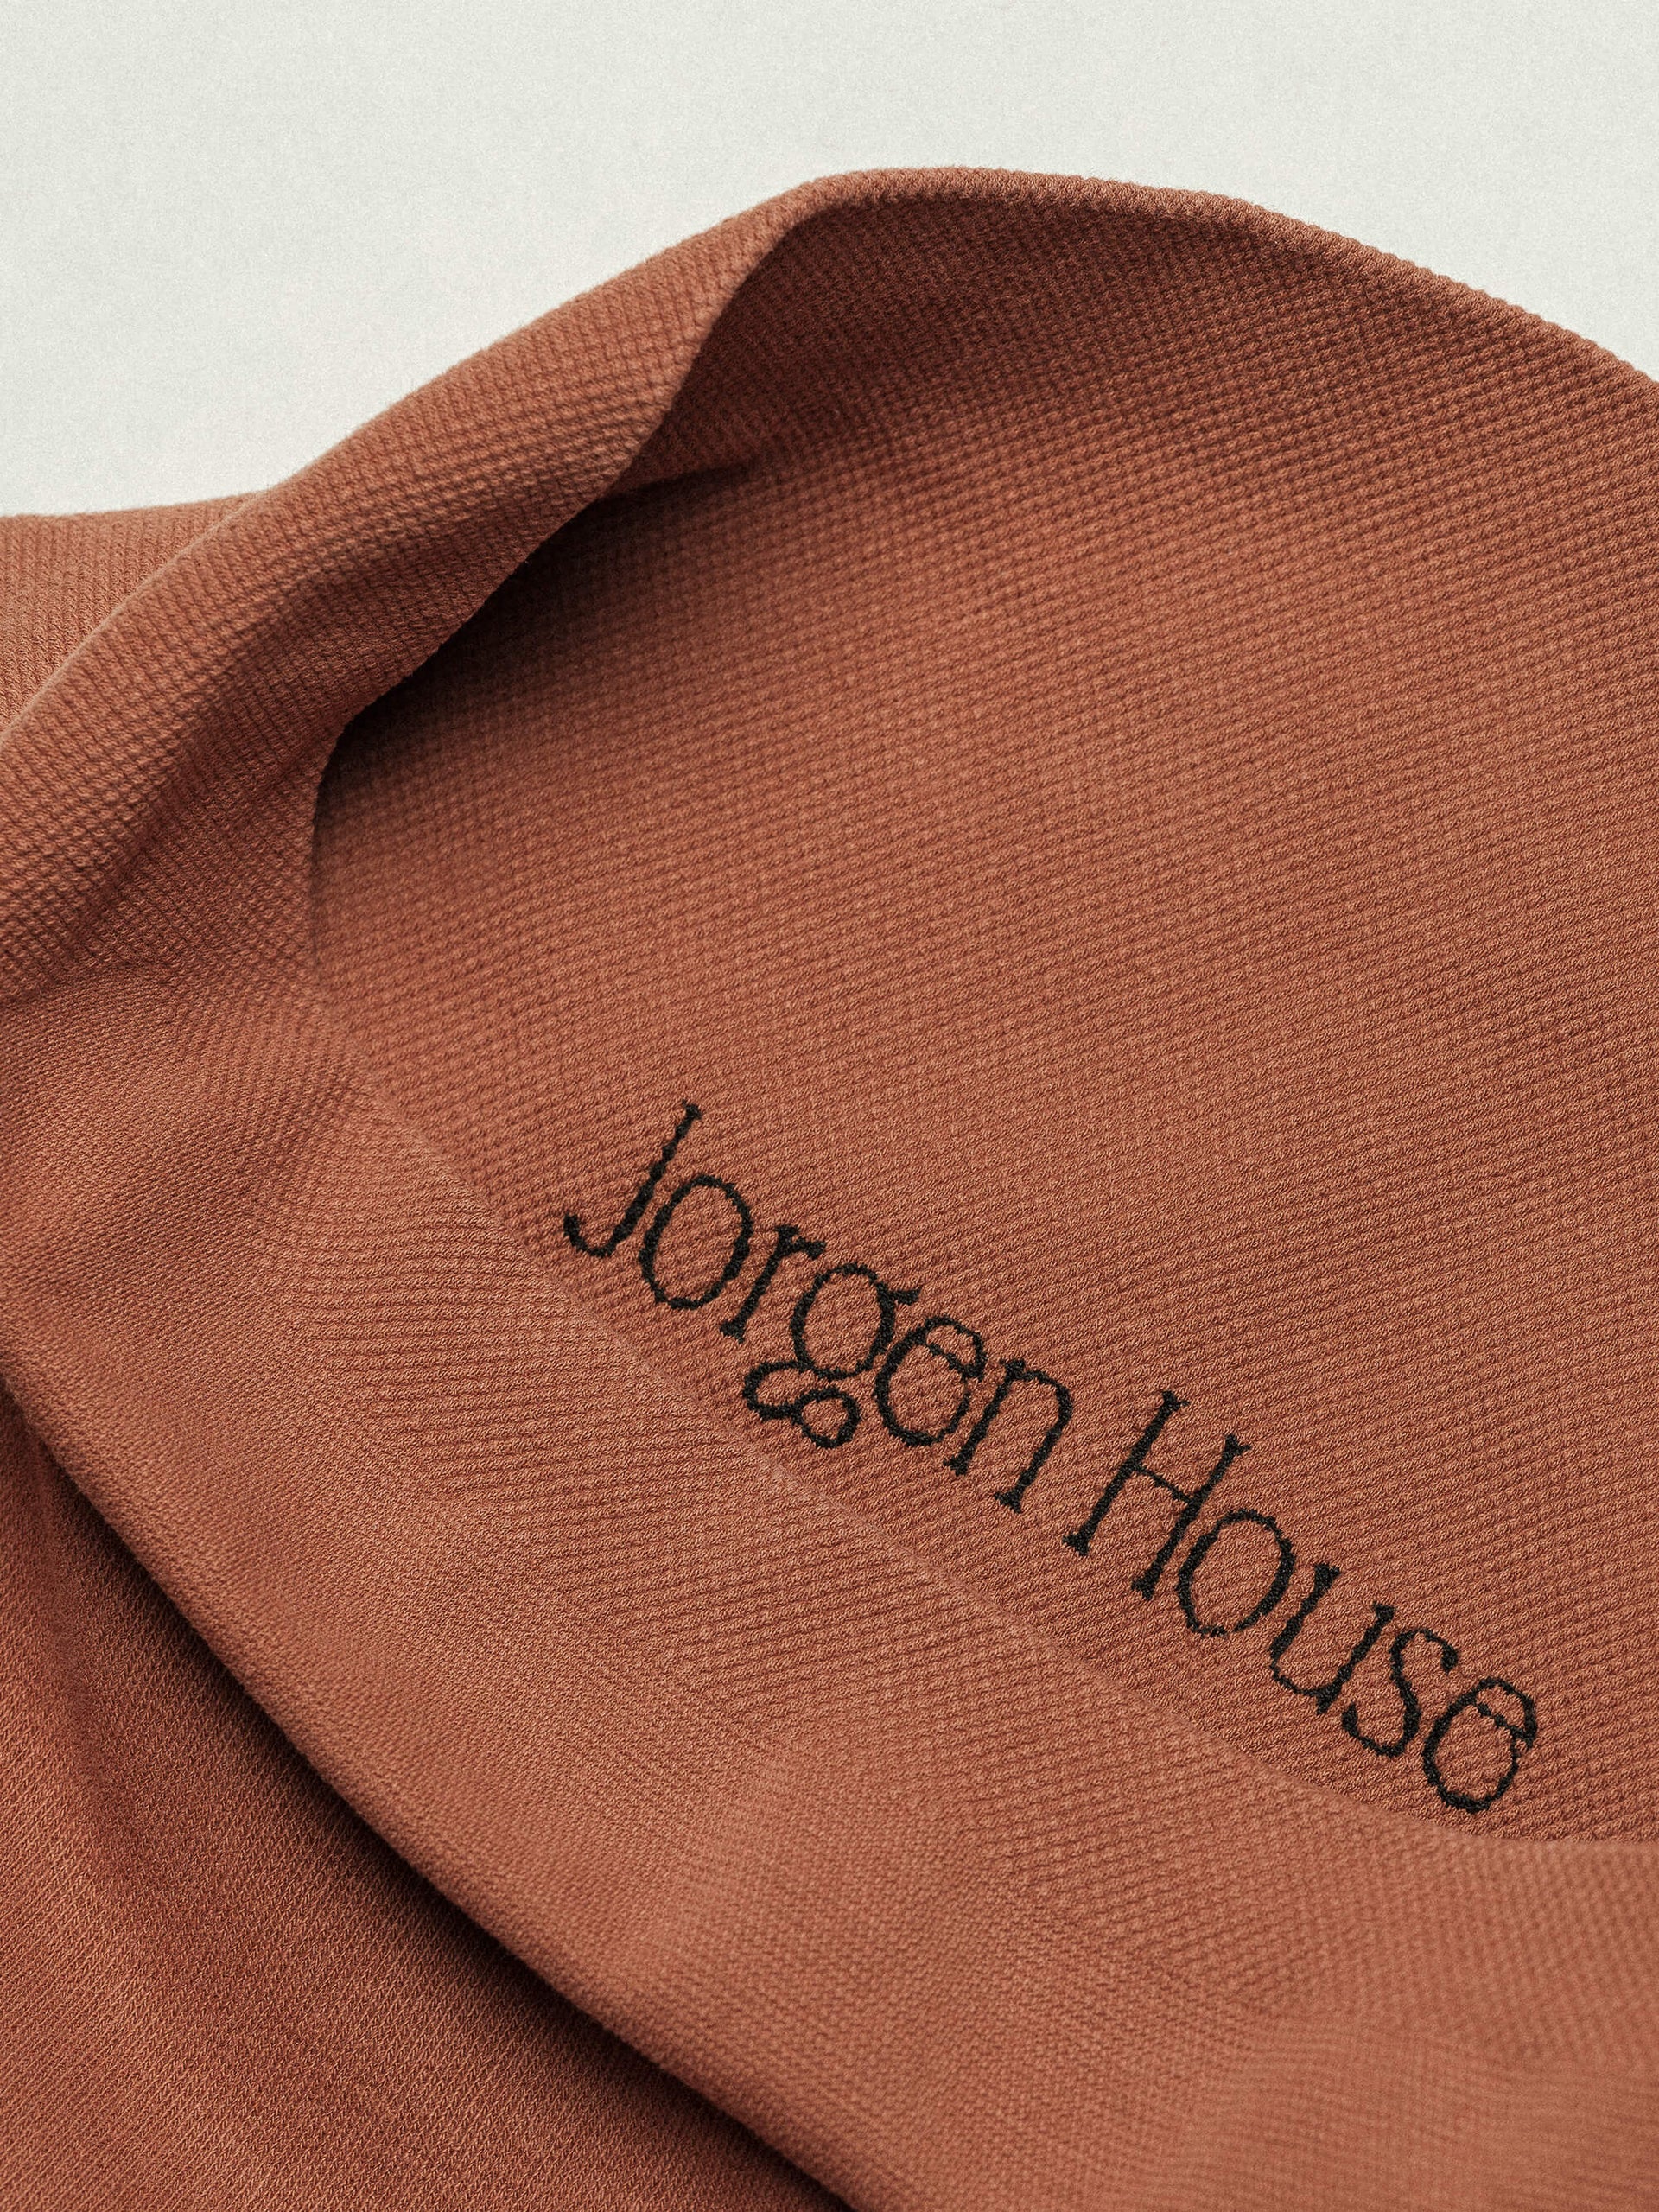 All products - Jorgen House